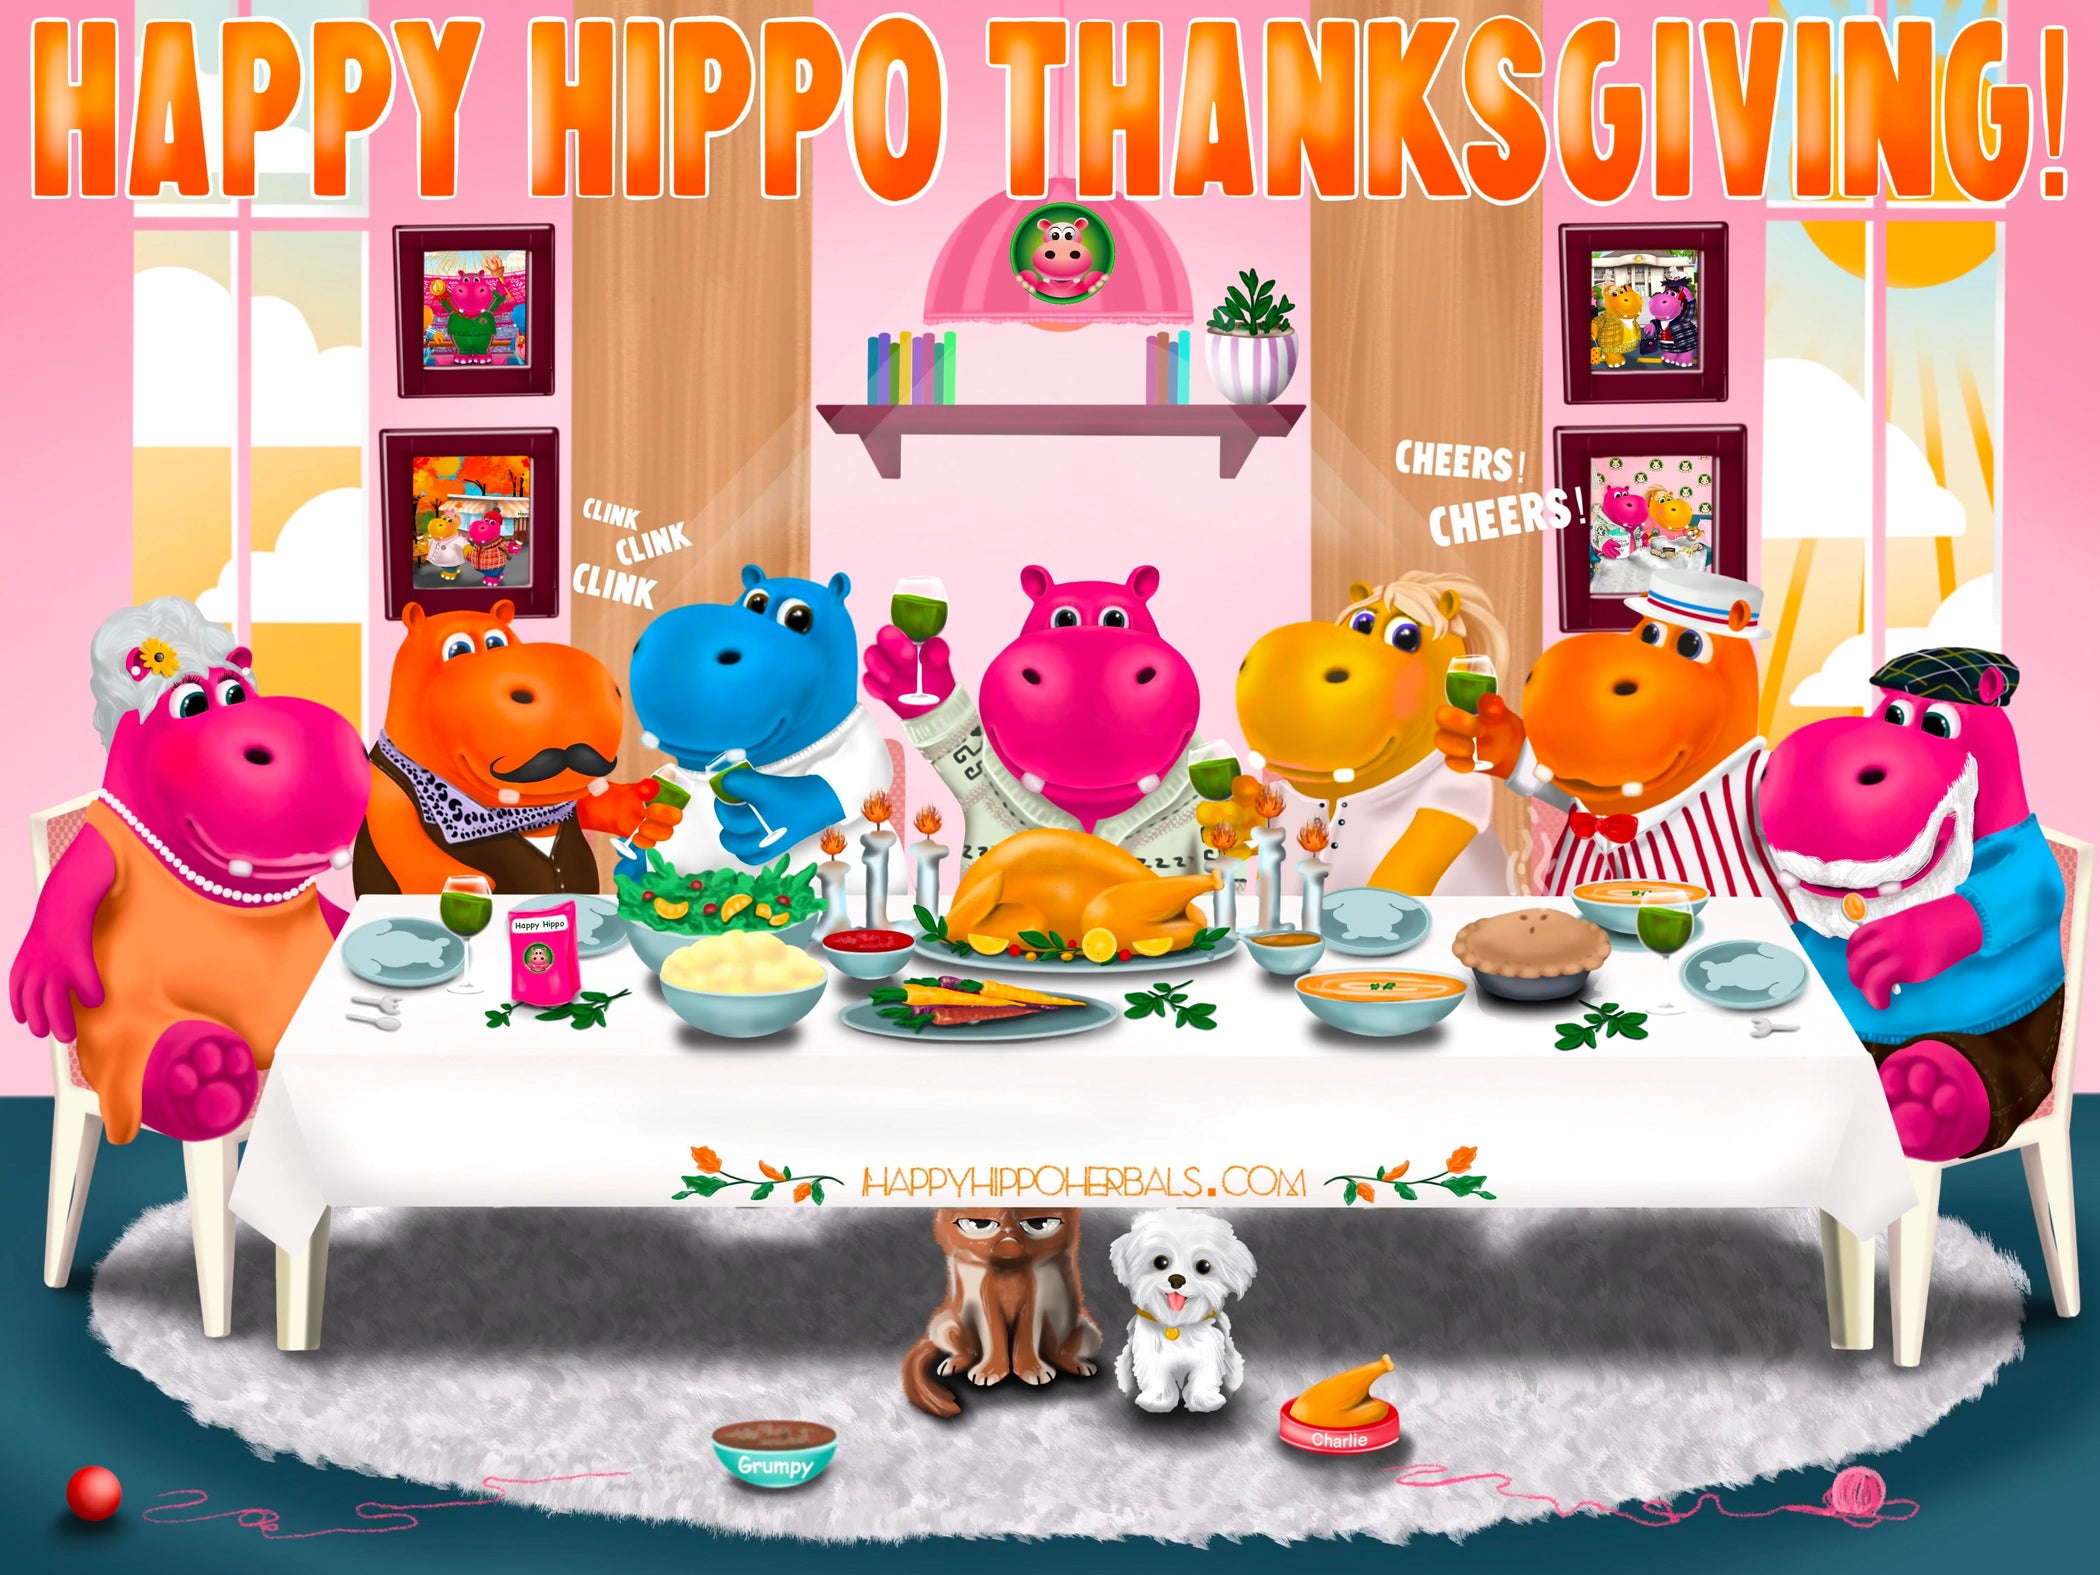 Graphic Designed image depicting Puddles and Bubbles the Hippo characters celebrating Thanksgiving with all of their Hippo friends. The entire group of hippos sit at a long table, set with an array of delicious food, and Happy Hippo brand kratom tea!